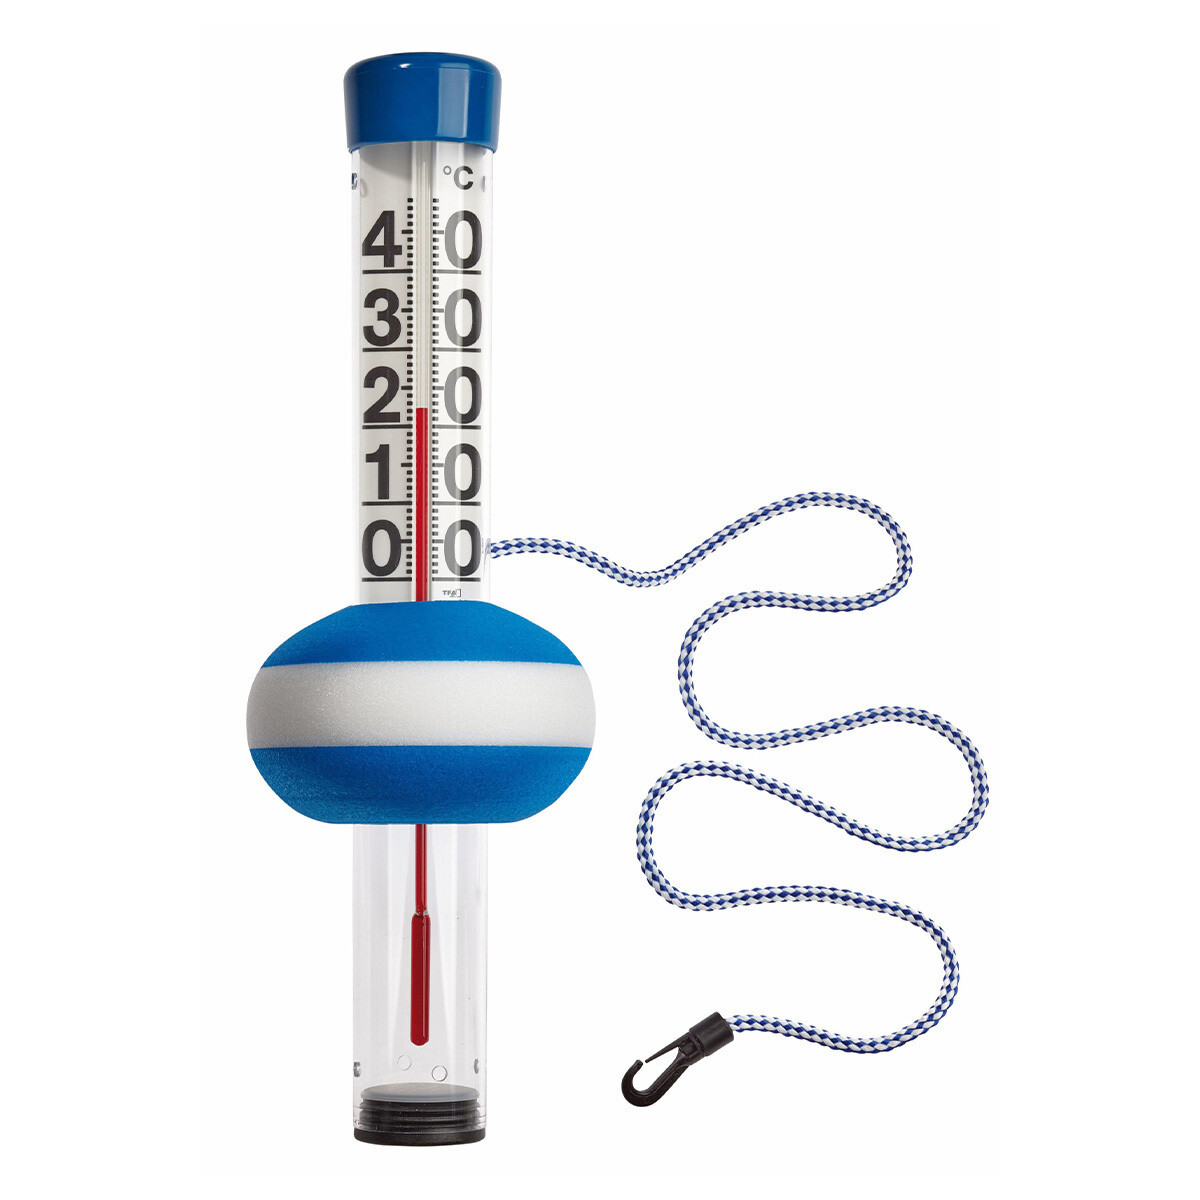 Poolthermometer NEPTUN